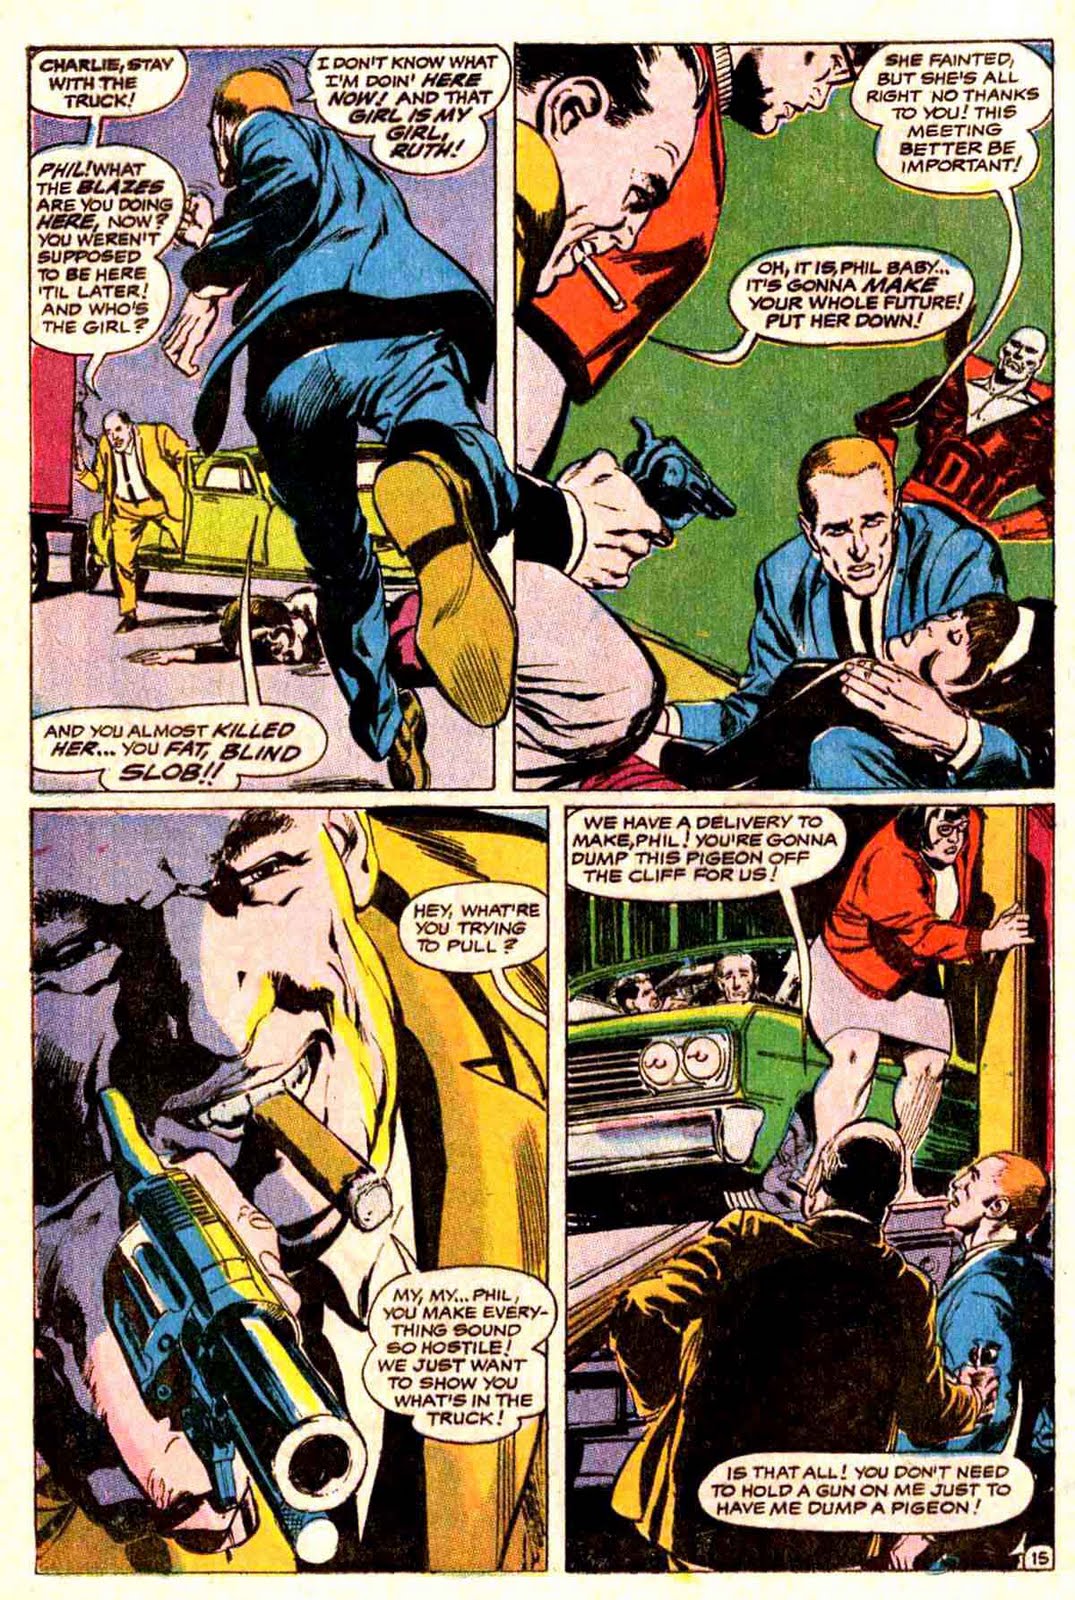 Strange Adventures v1 #212 dc 1960s silver age comic book page art by Neal Adams